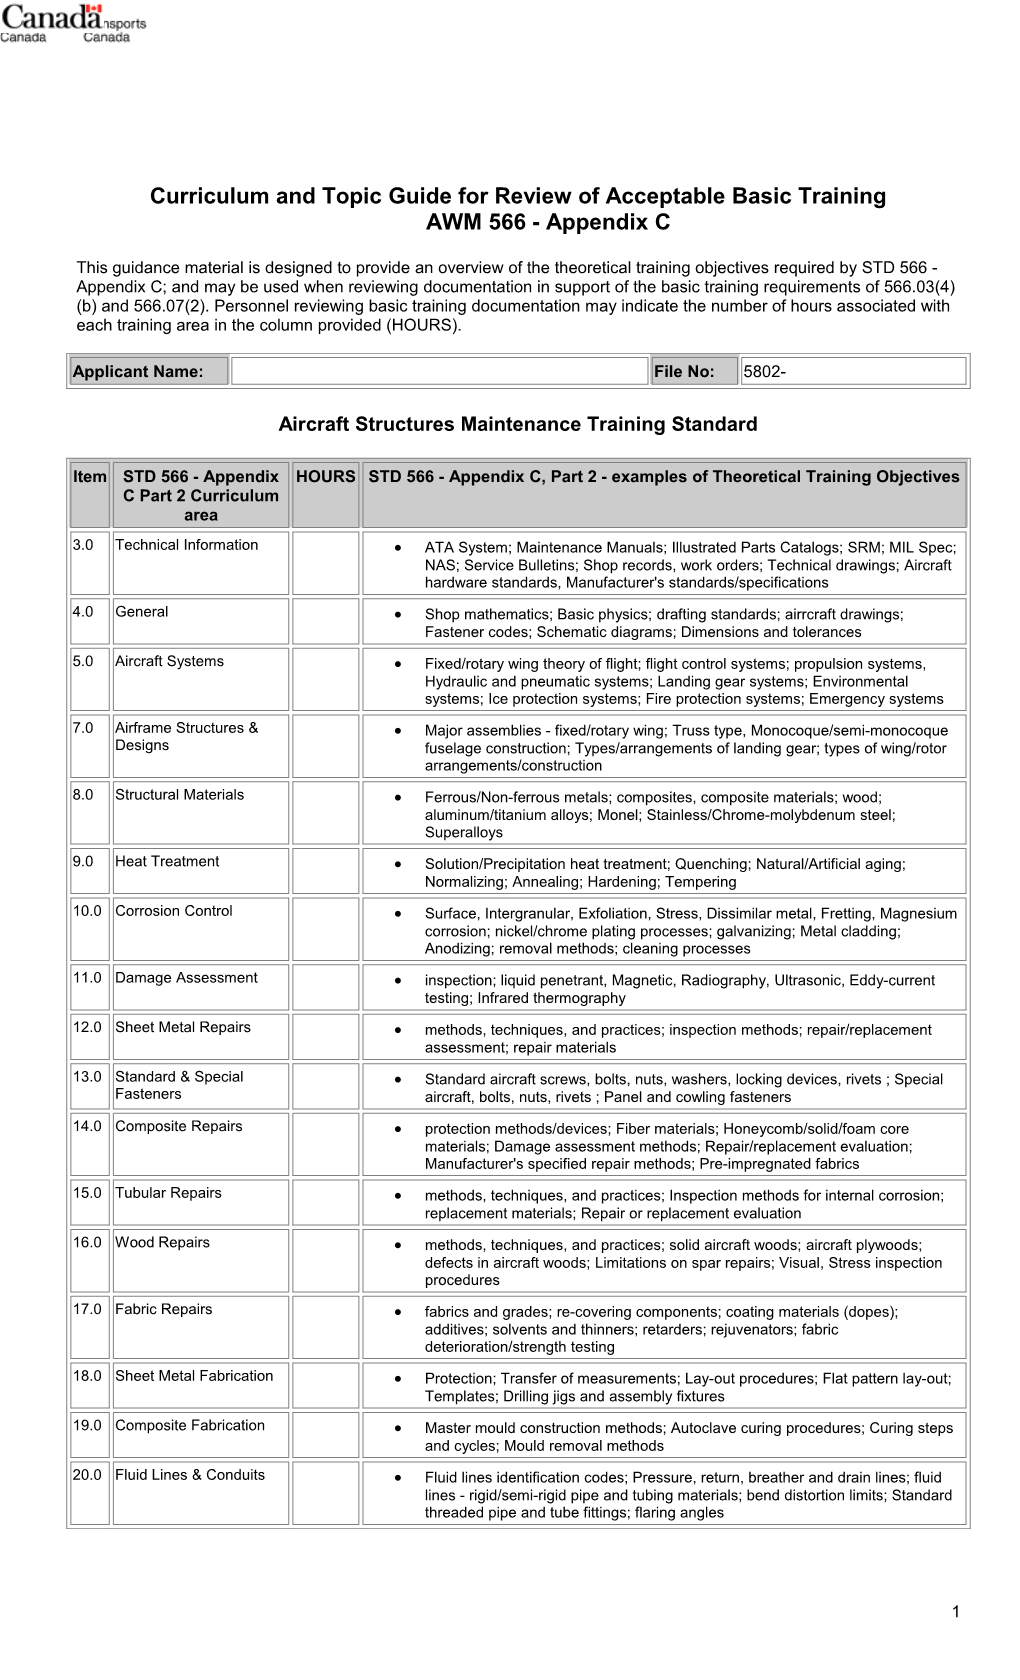 Curriculum and Topic Guide for Review of Acceptable Basic Trainingawm 566 - Appendix C